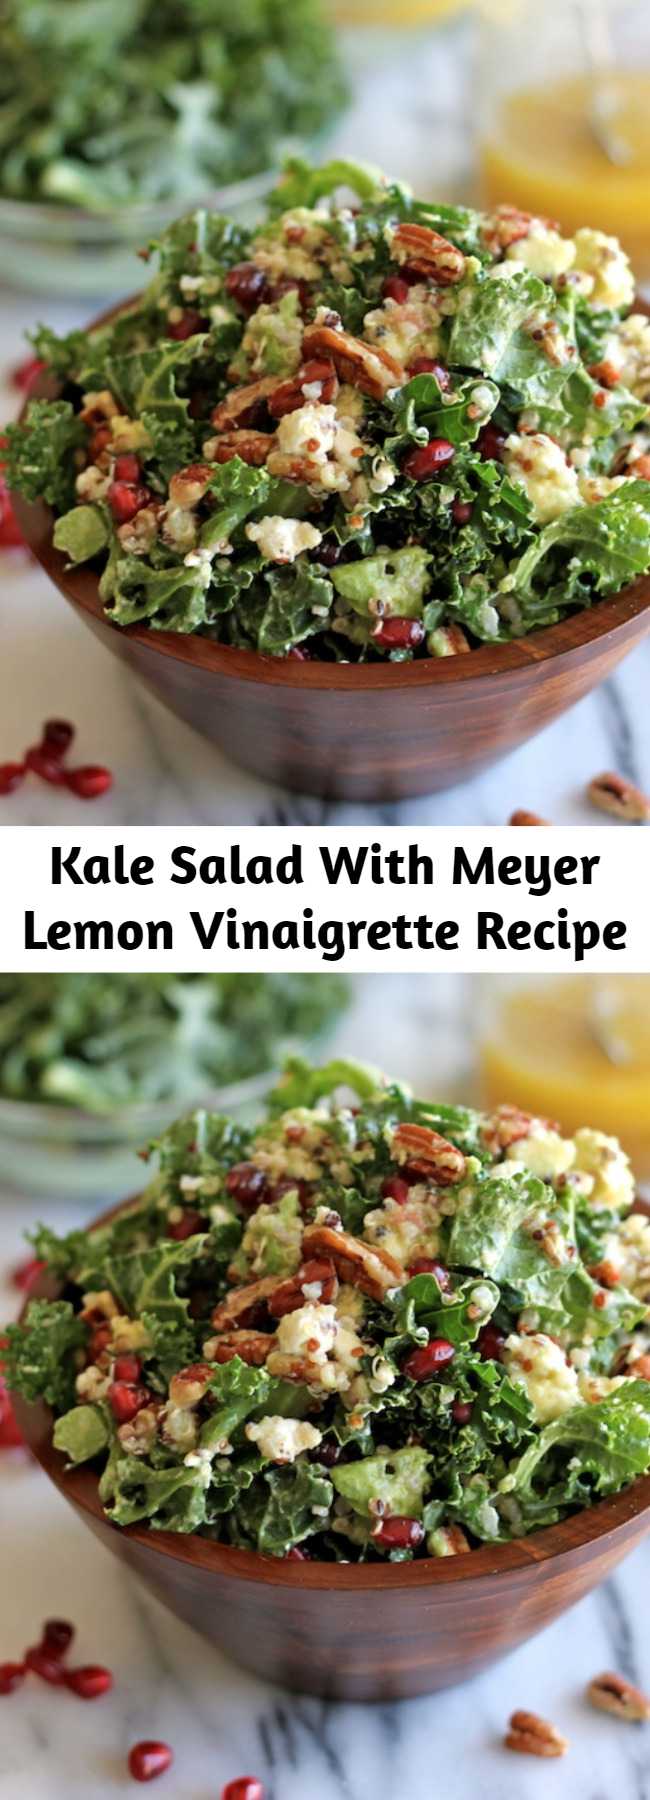 Kale Salad With Meyer Lemon Vinaigrette Recipe - Perfect as a light lunch or even a meatless Monday dinner option!